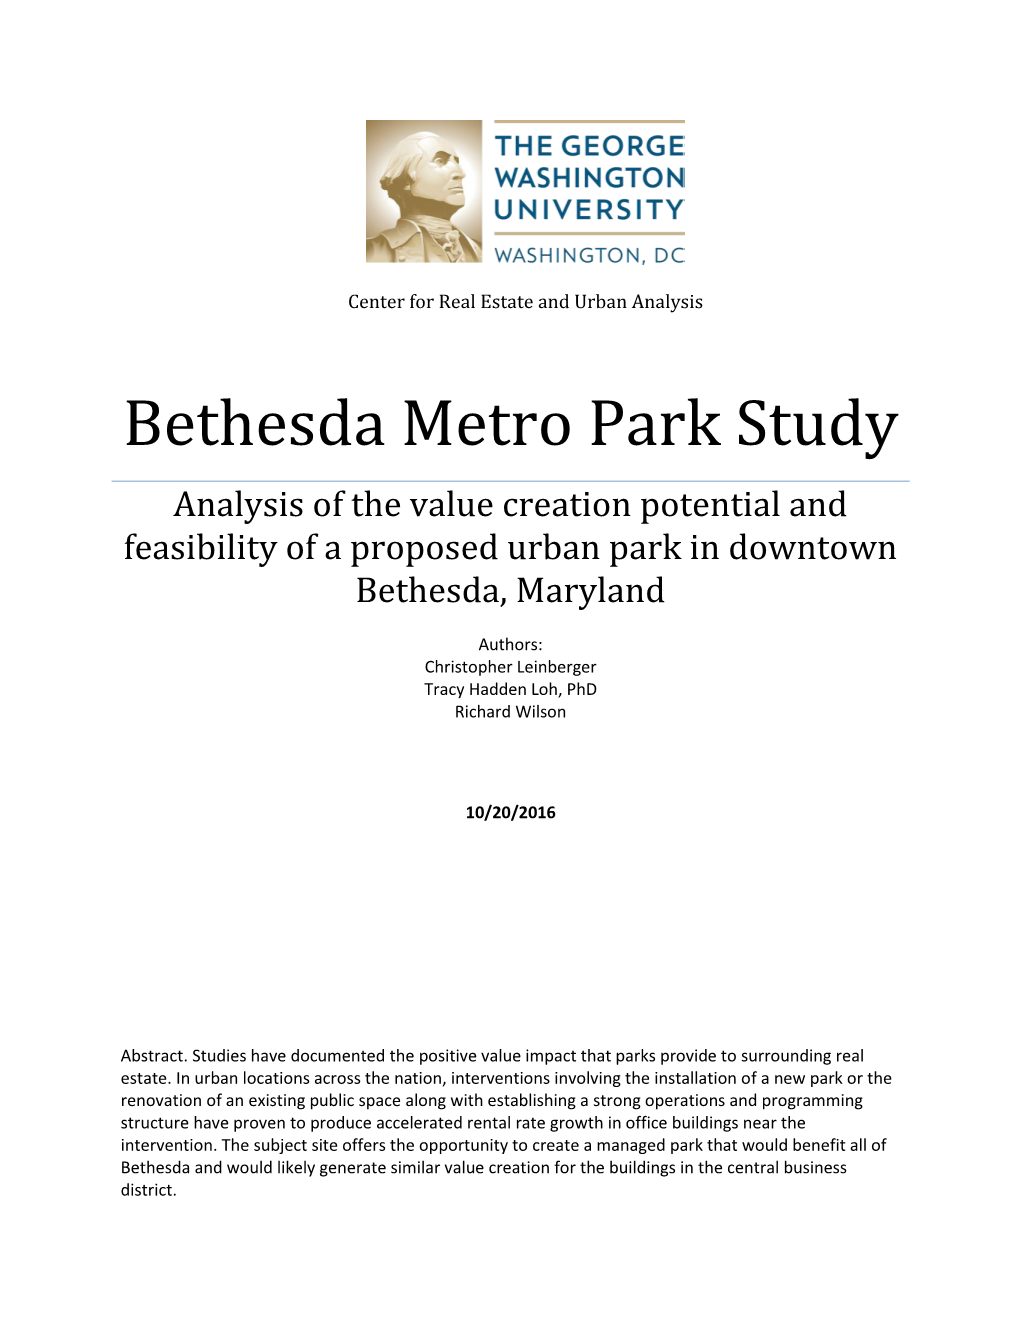 Bethesda Metro Park Study Analysis of the Value Creation Potential and Feasibility of a Proposed Urban Park in Downtown Bethesda, Maryland